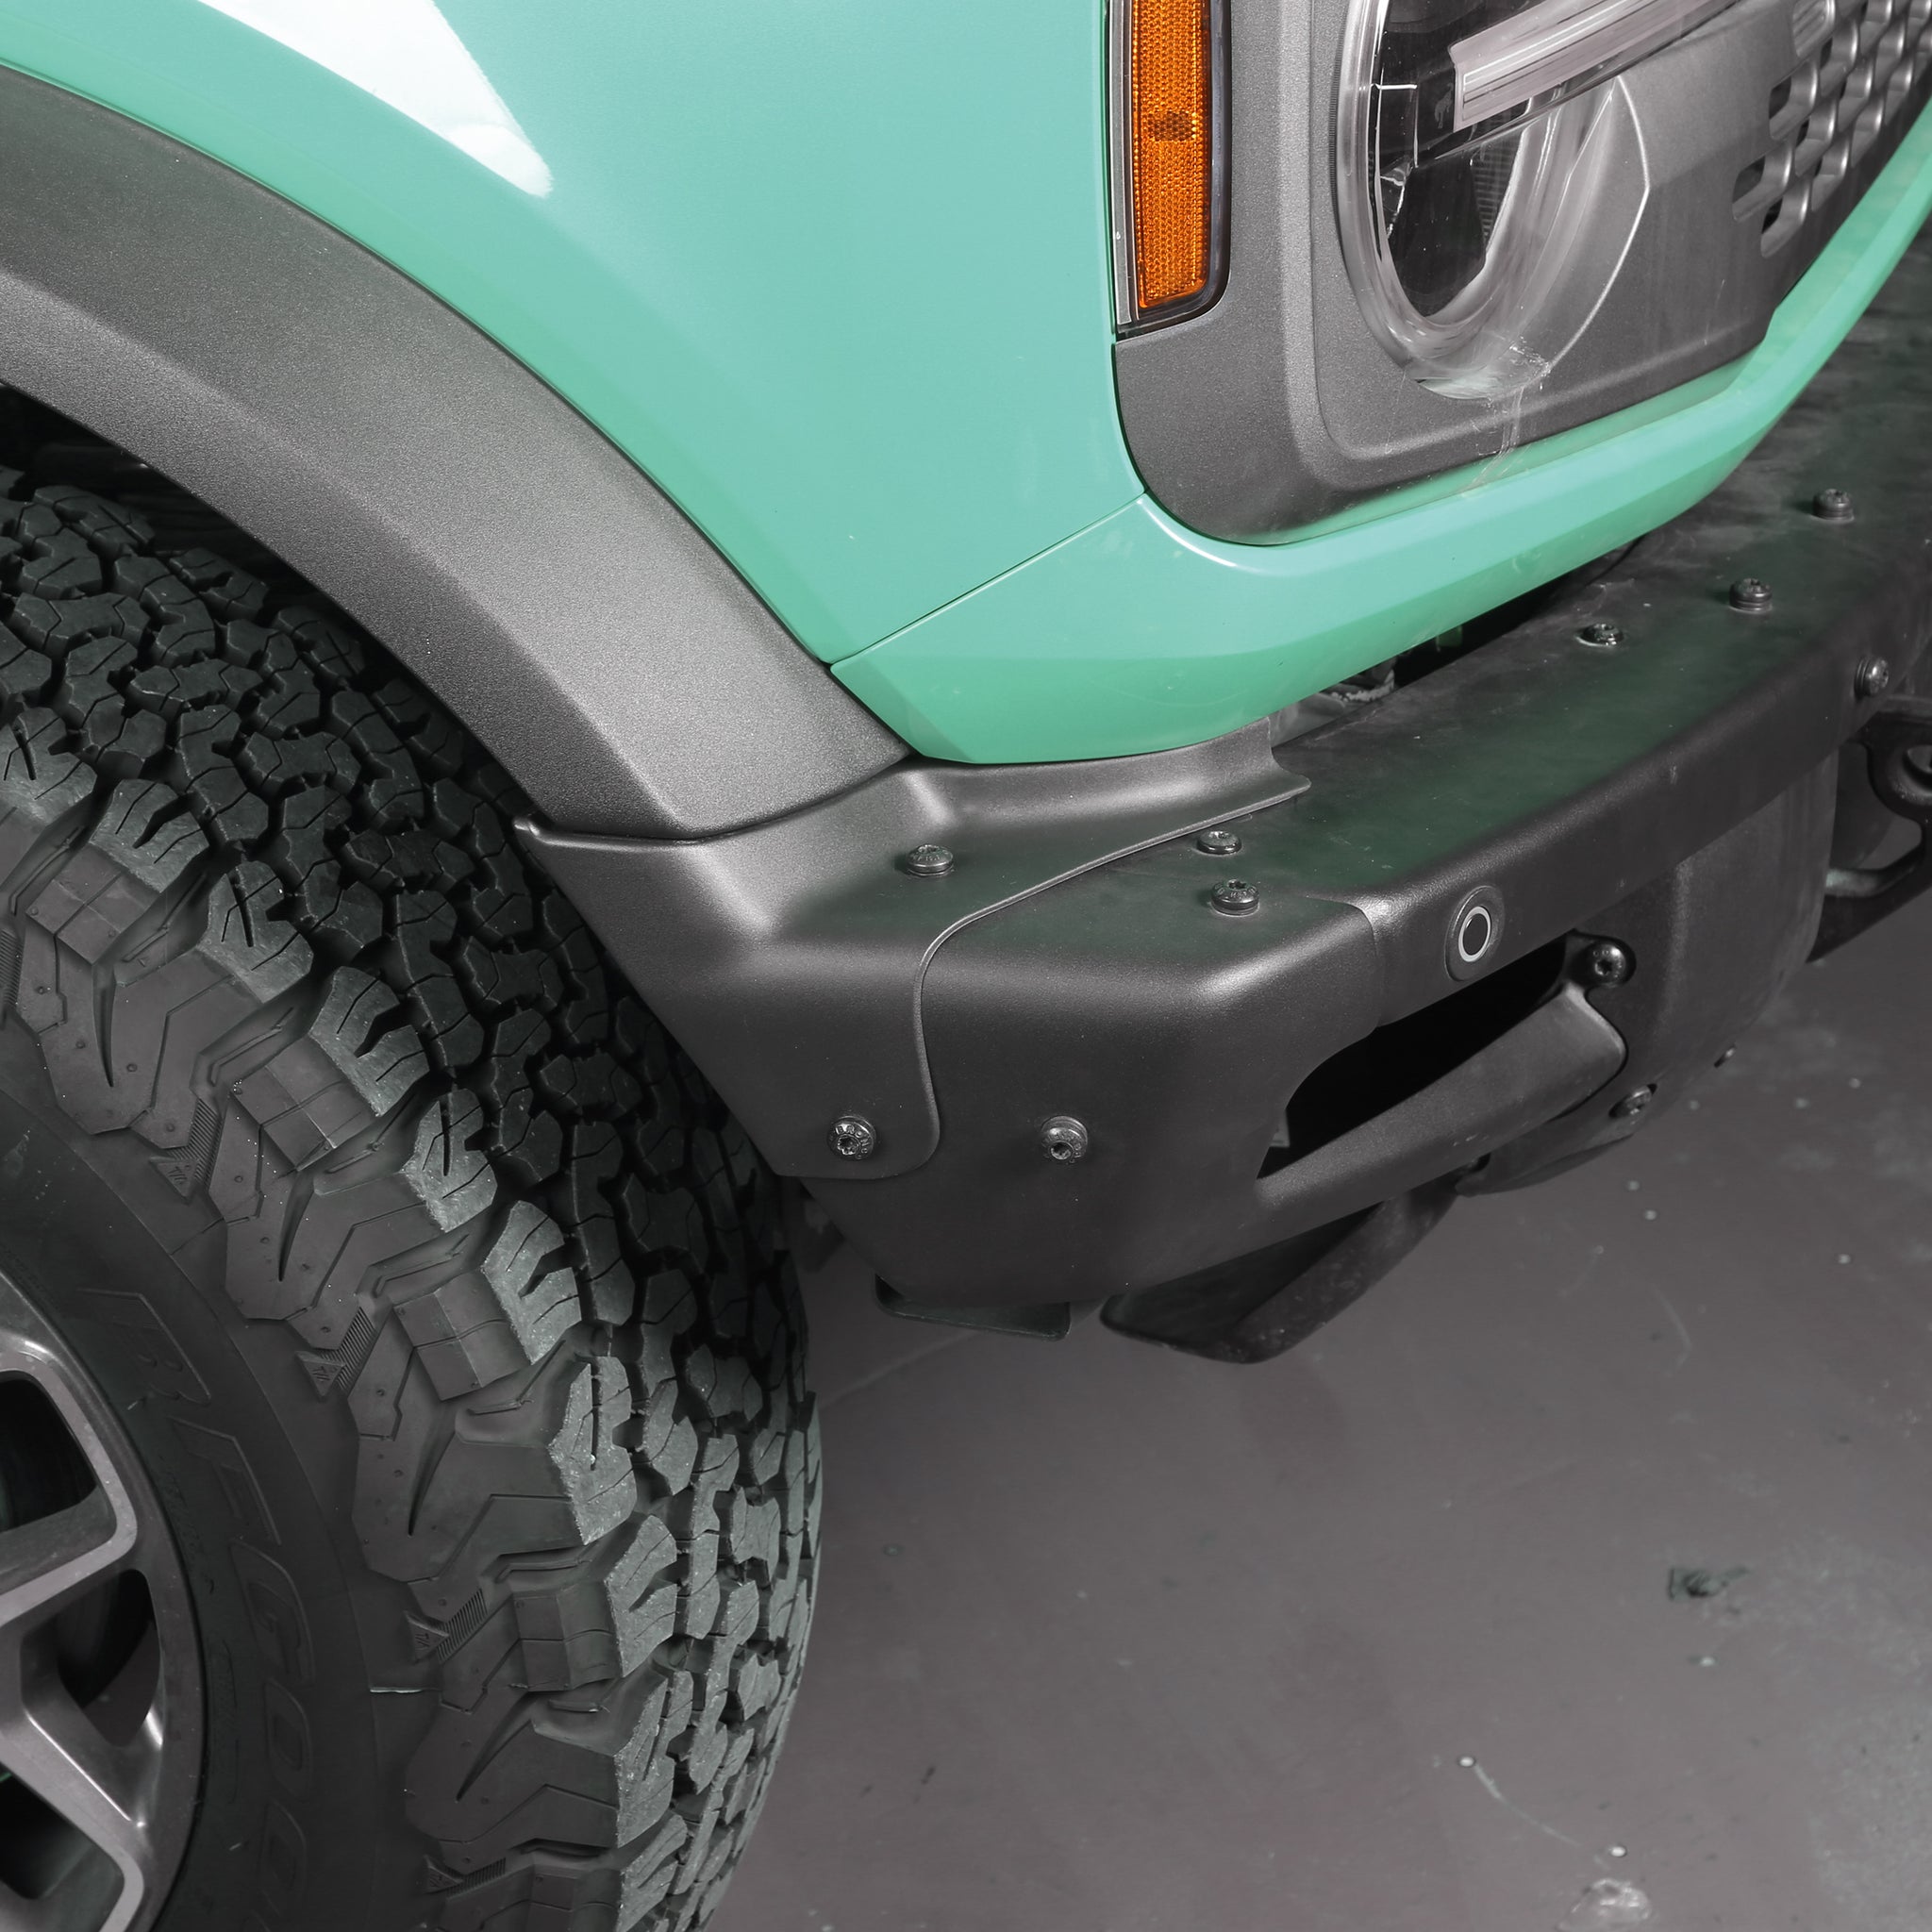 Fender Flare Extensions Front with stock flares